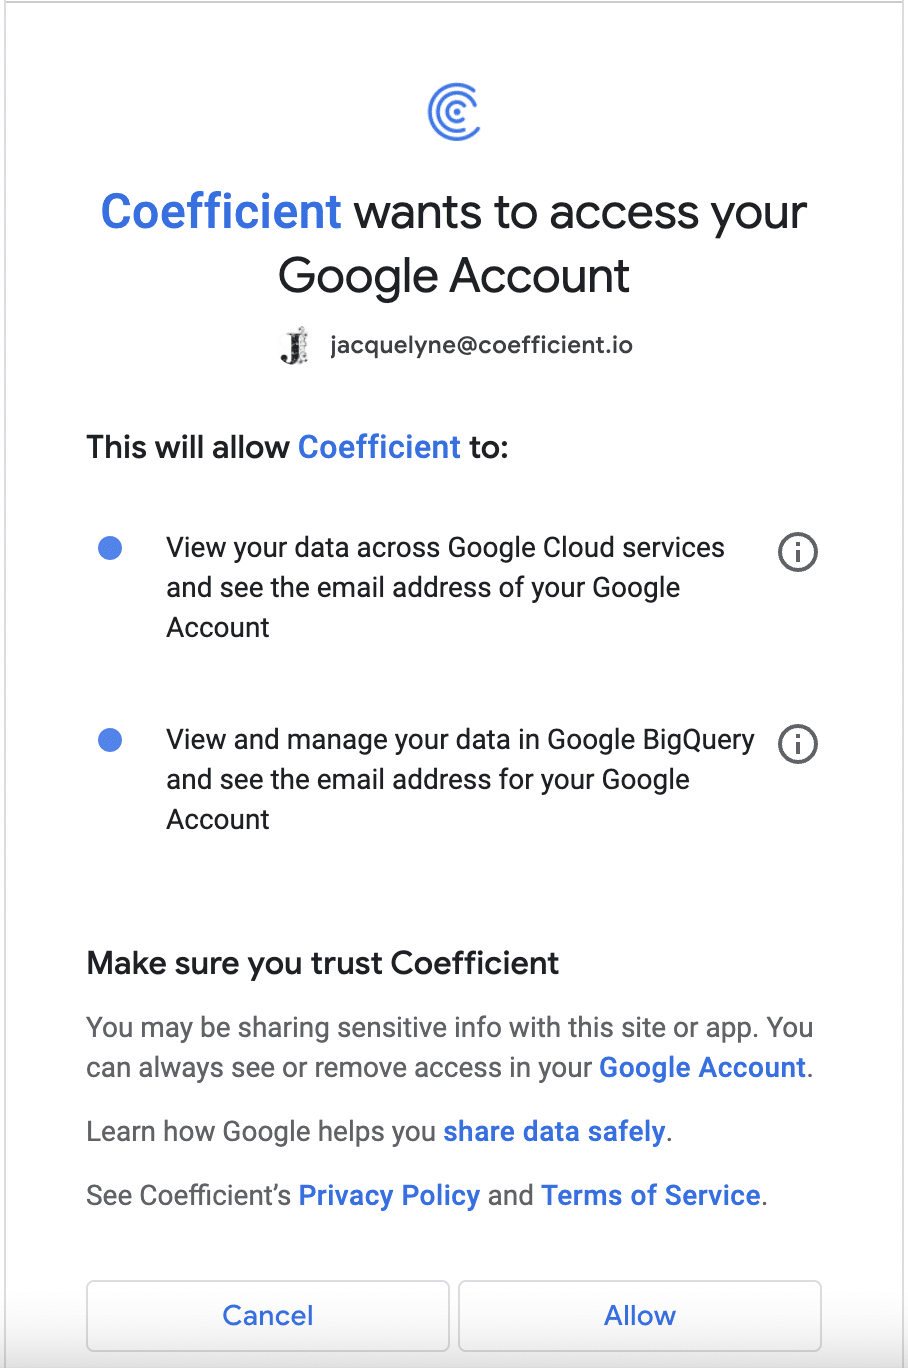 Following steps to authorize Coefficient’s access to BigQuery data